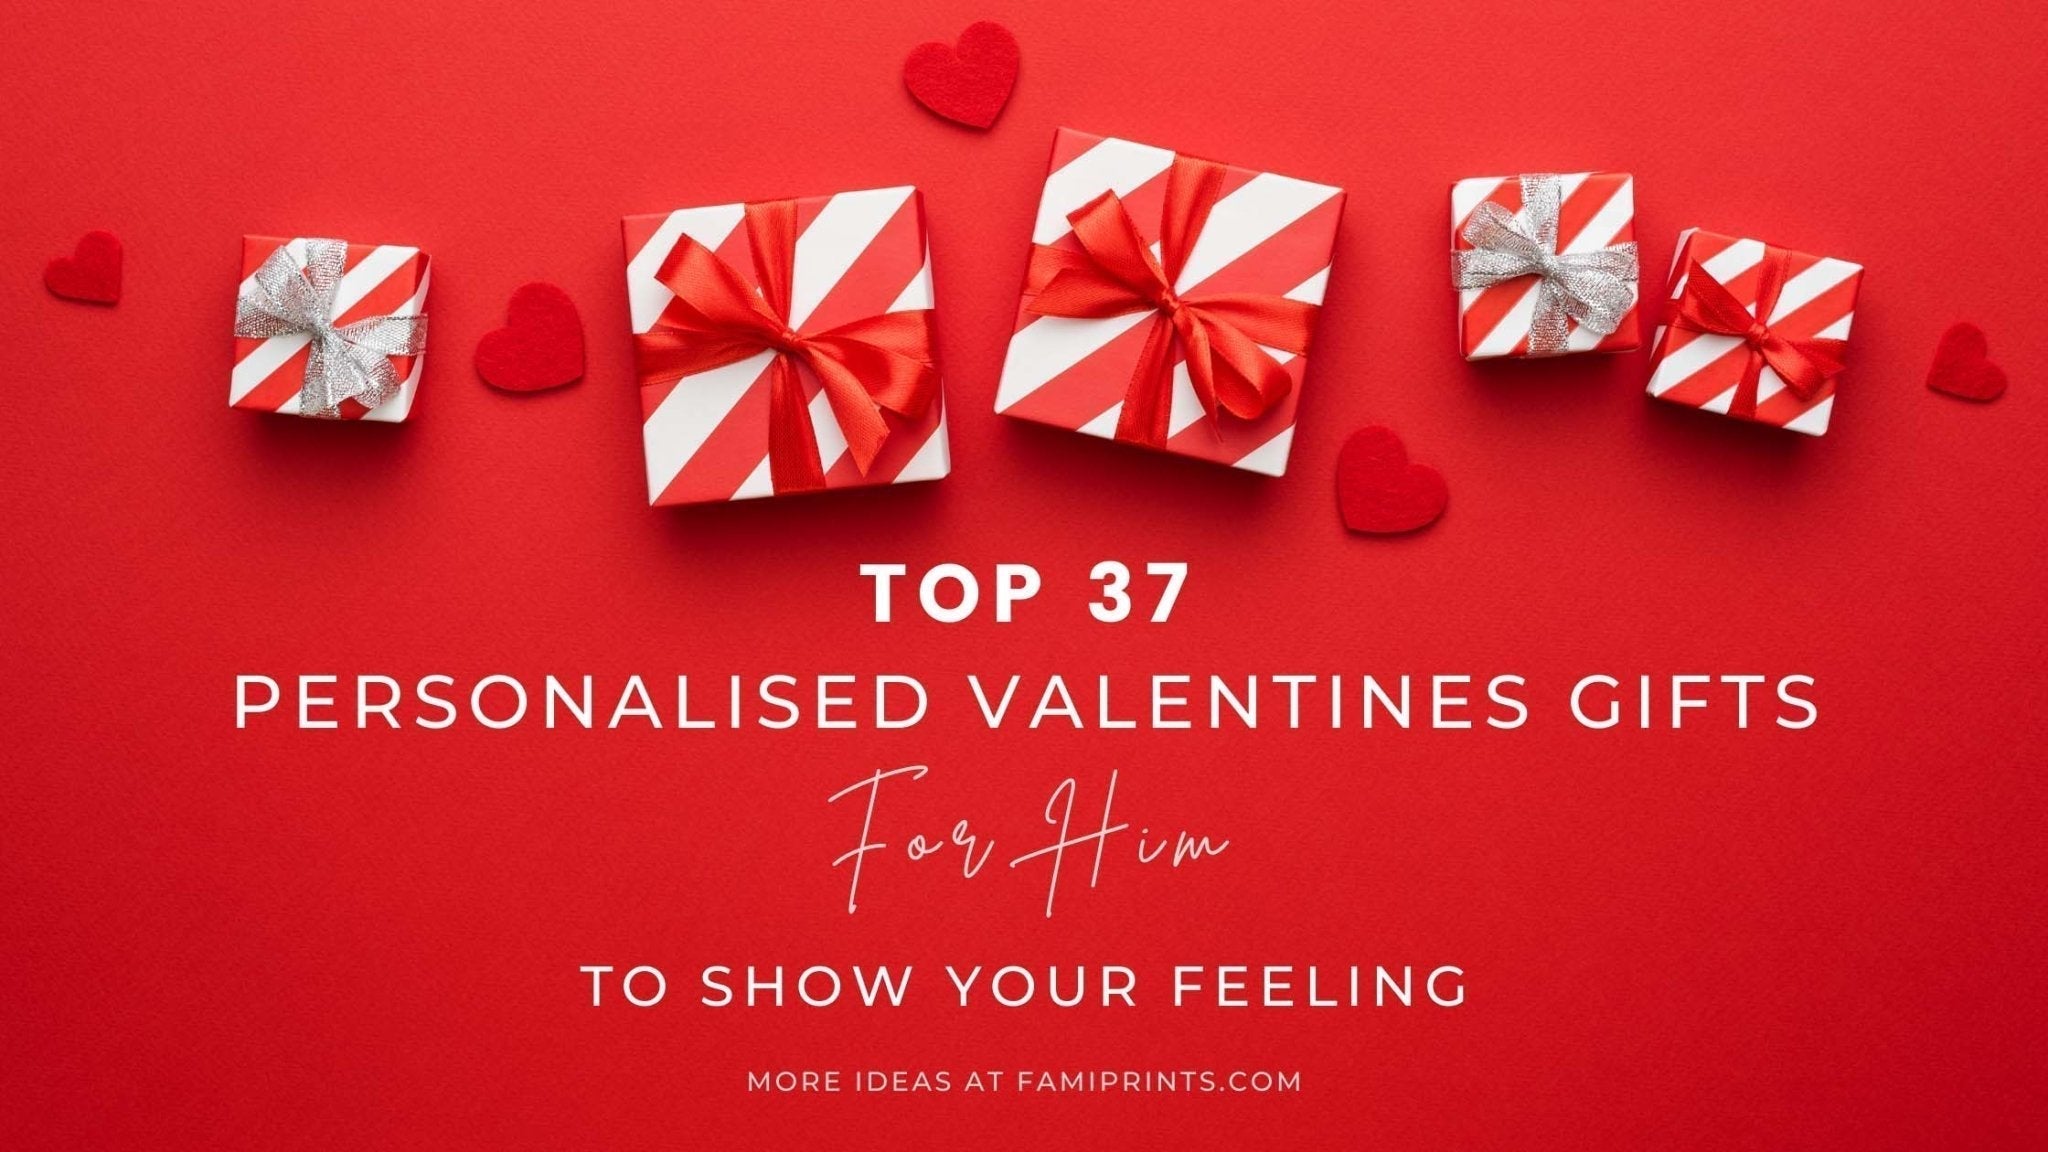 Top Unique Valentine's Gifts That Will Win His Heart - Wander Prints™